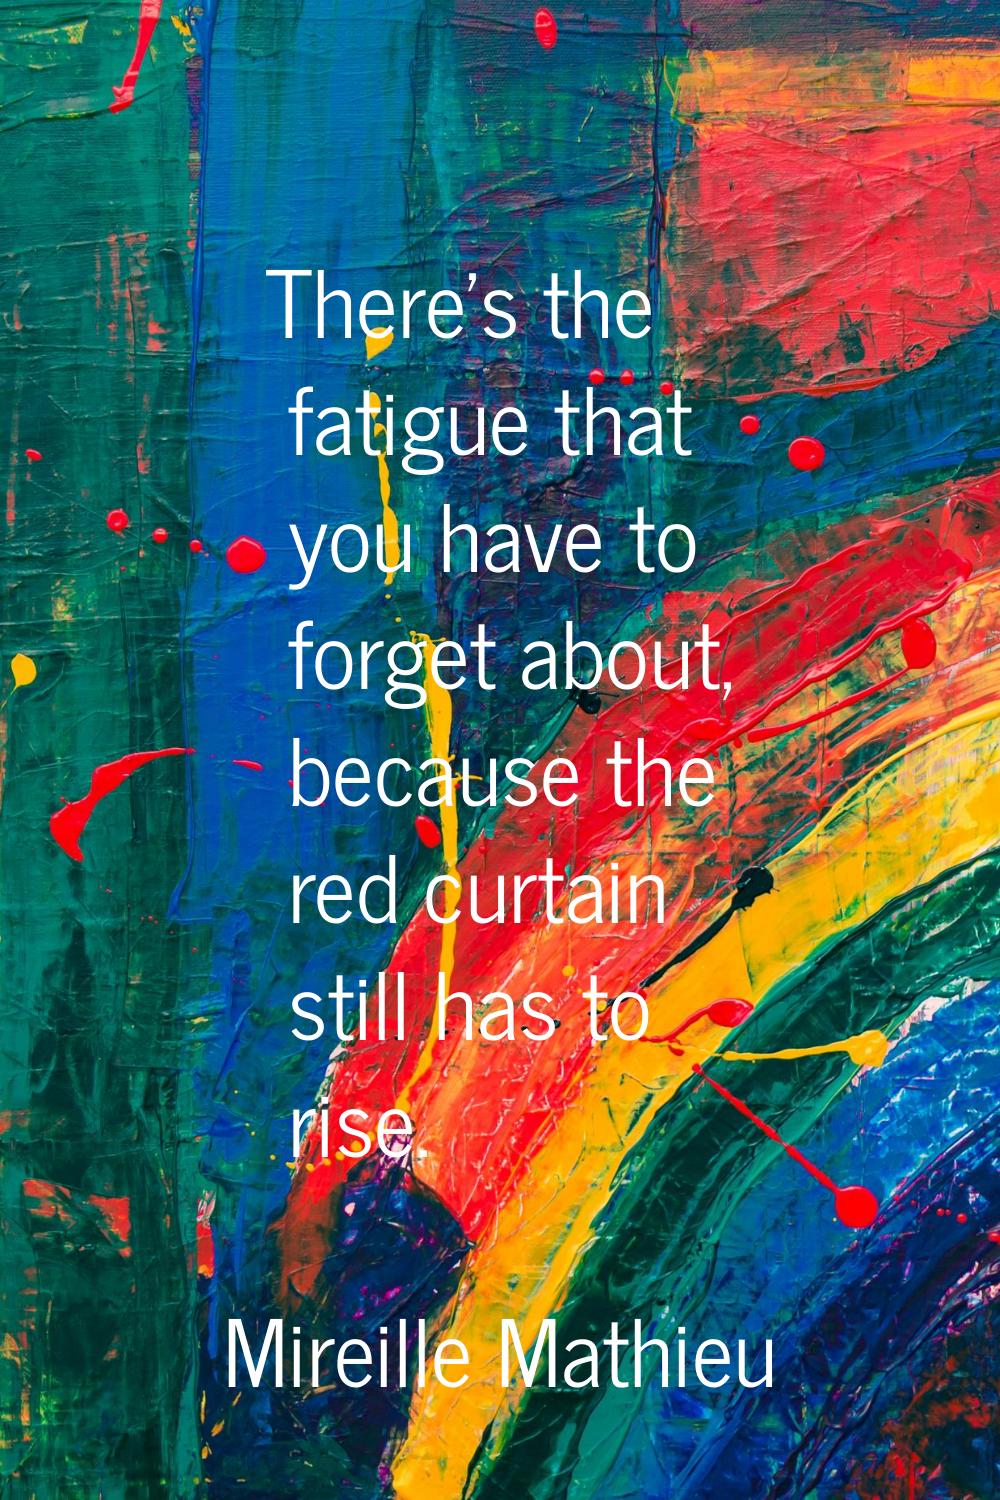 There's the fatigue that you have to forget about, because the red curtain still has to rise.